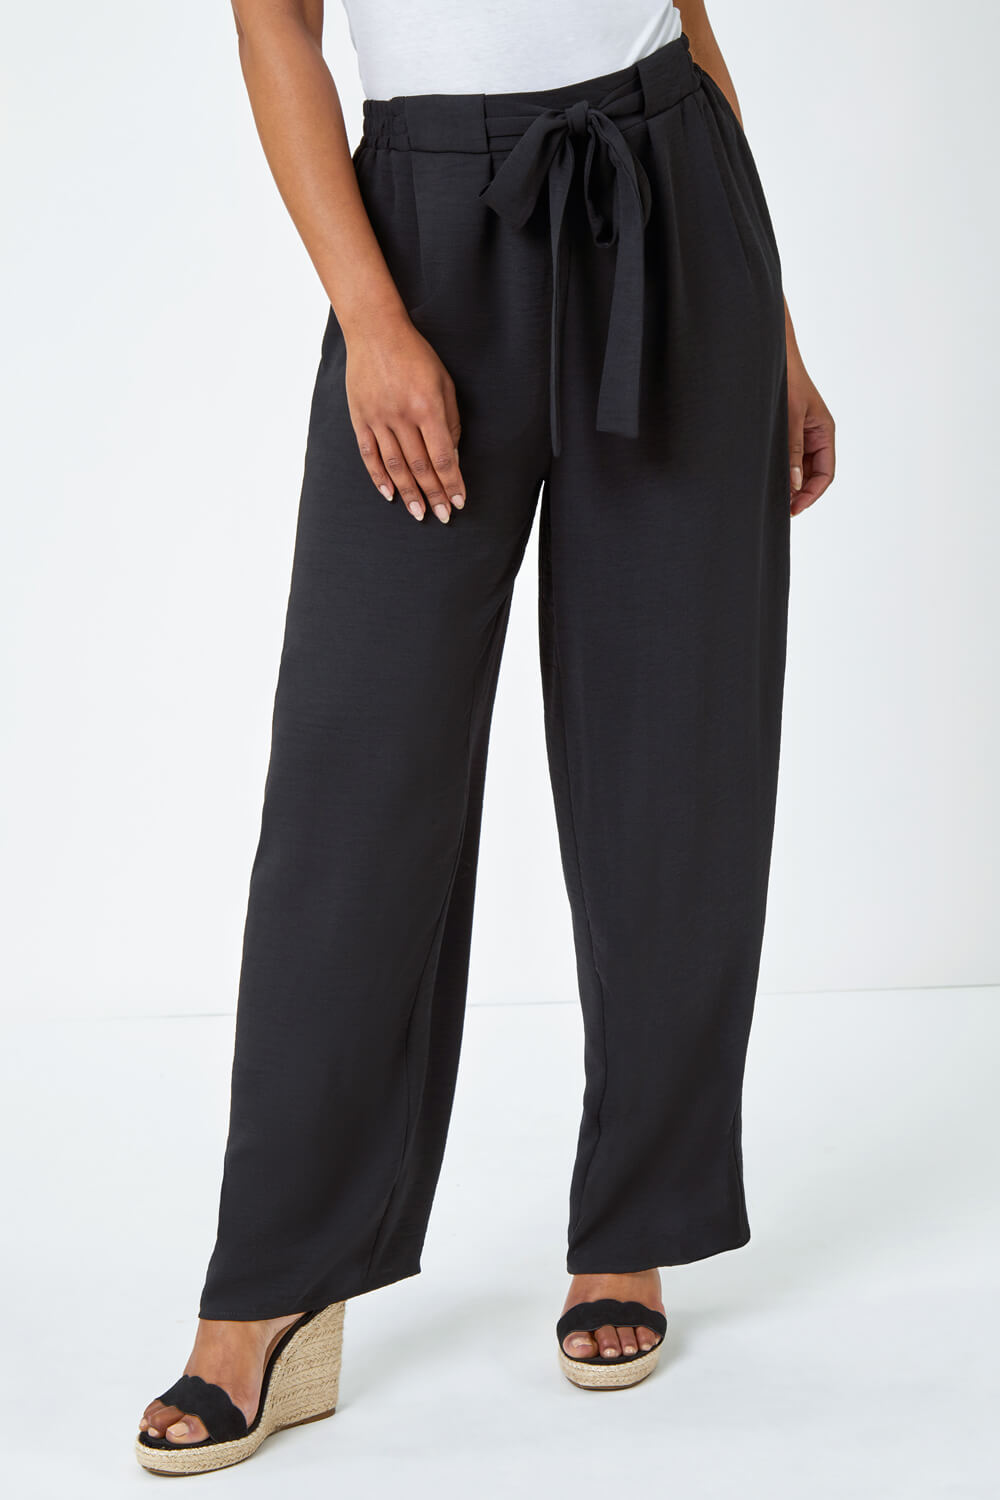 Black Petite Wide Leg Belted Trouser, Image 2 of 5